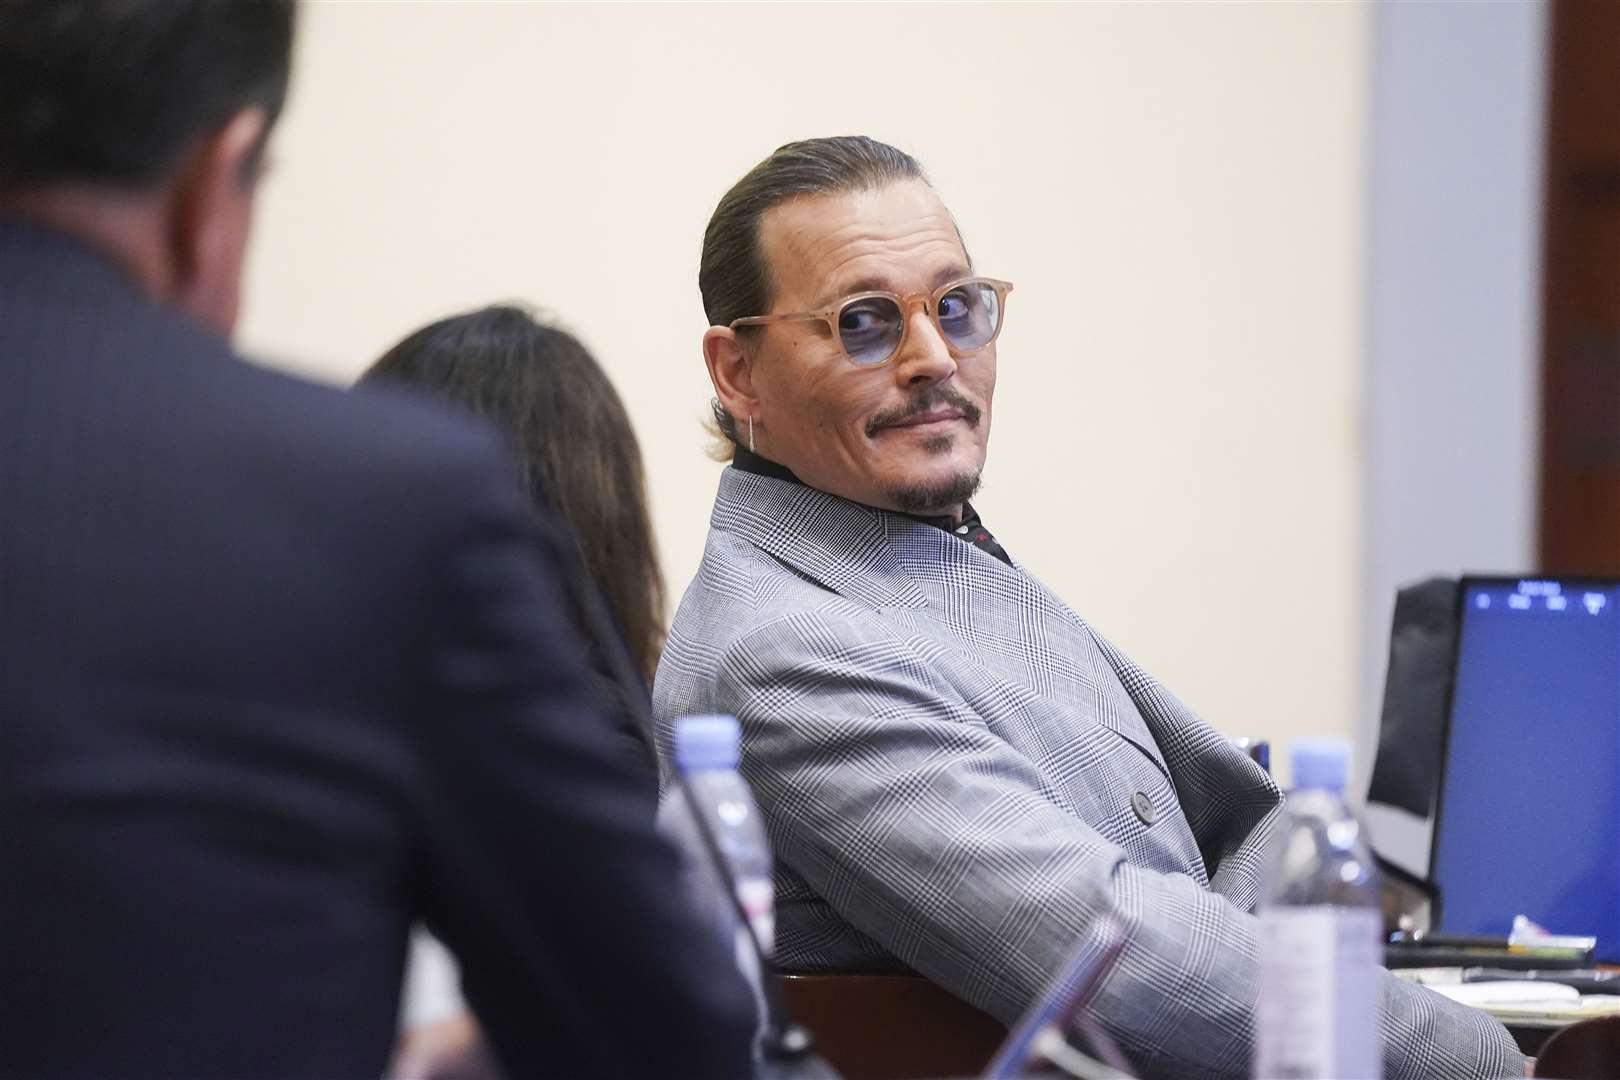 Mr Depp’s 2019 defamation case against Ms Heard, also delayed due to the pandemic, began on April 11 at the Fairfax County District Court, in Virginia (Shawn Thew/AP)